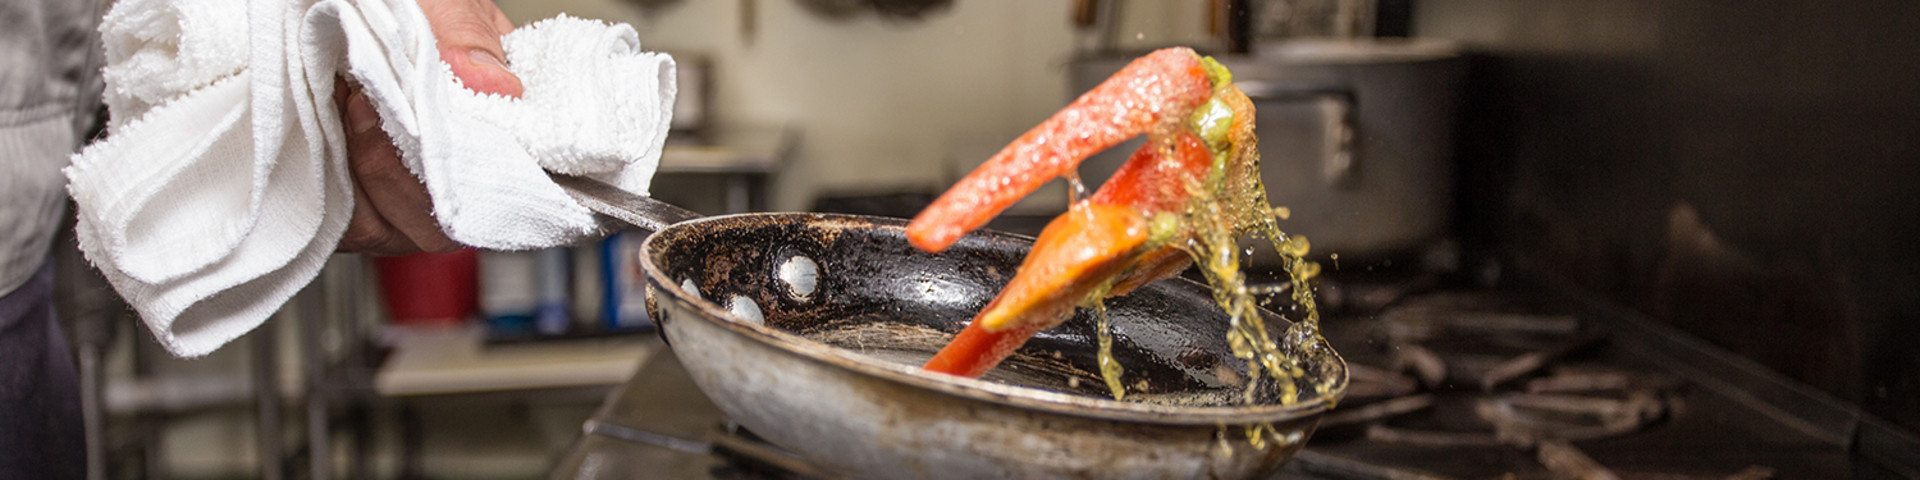 Flipping Carrots in a Pan